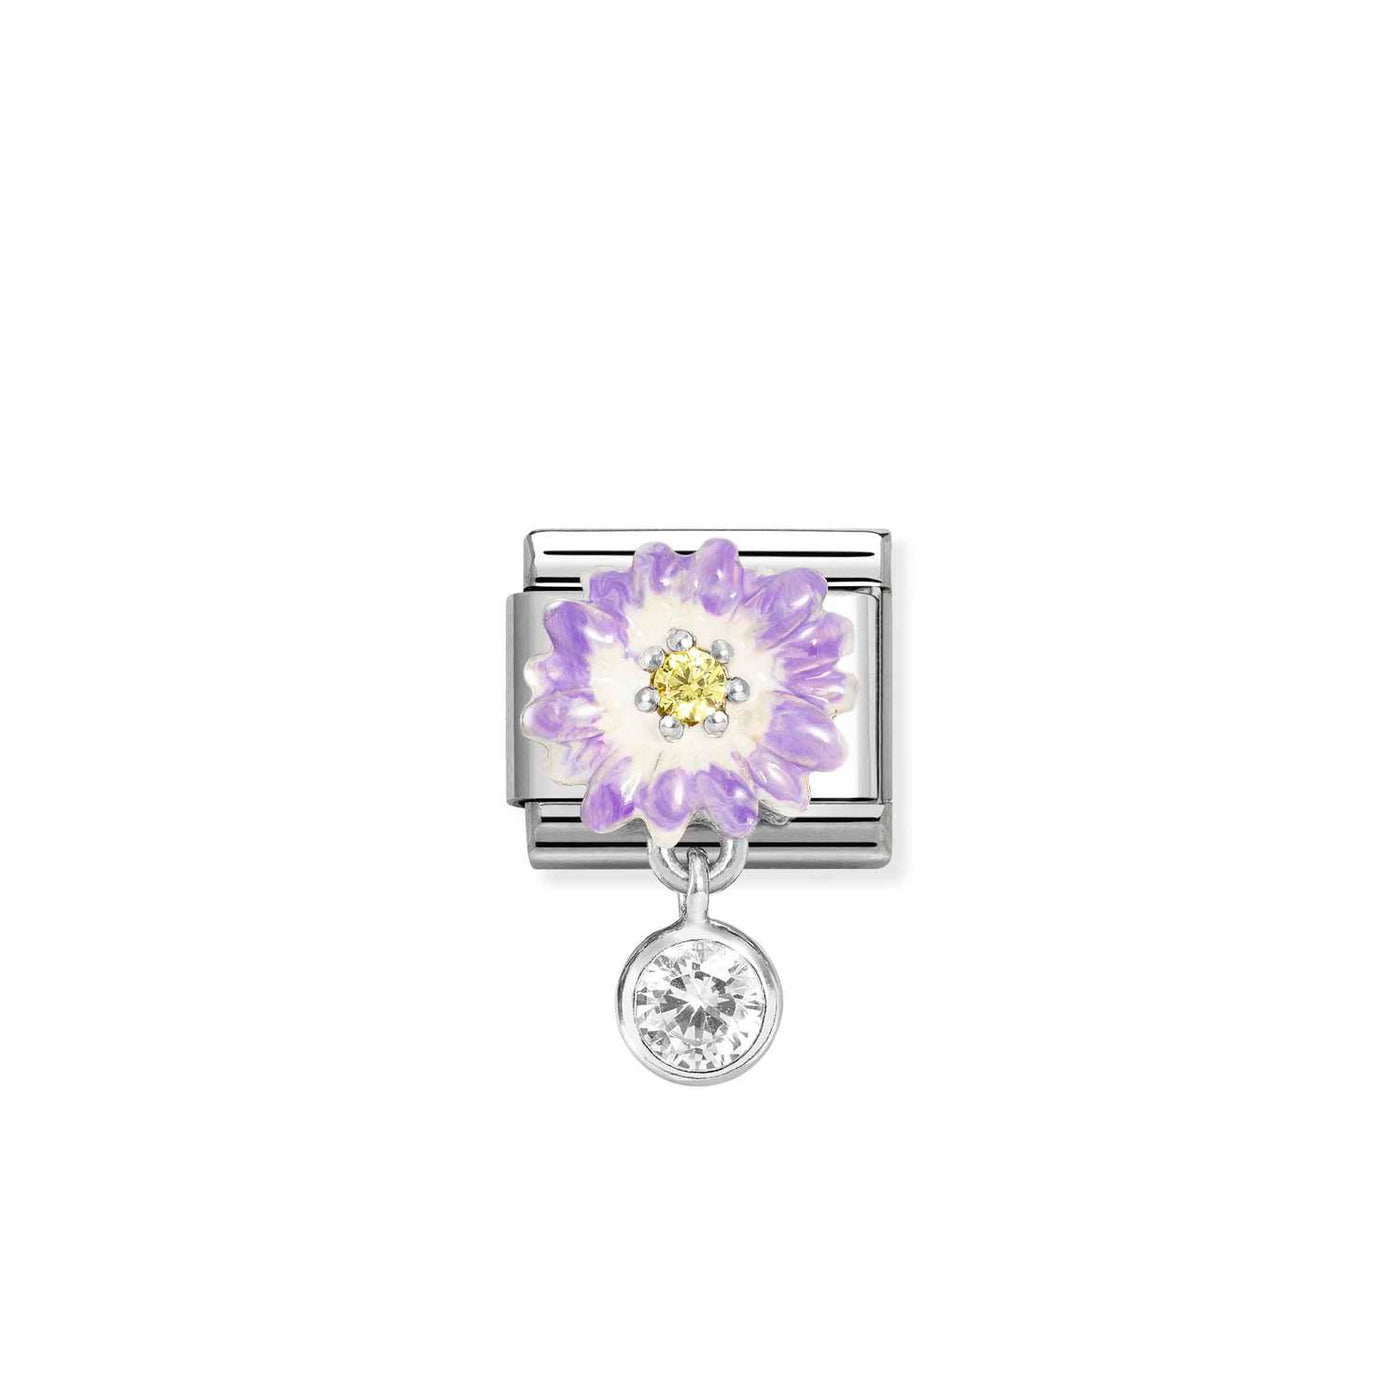 Nomination Classic Silver Cubic Zirconia Lilac Daisy Round Drop Charm